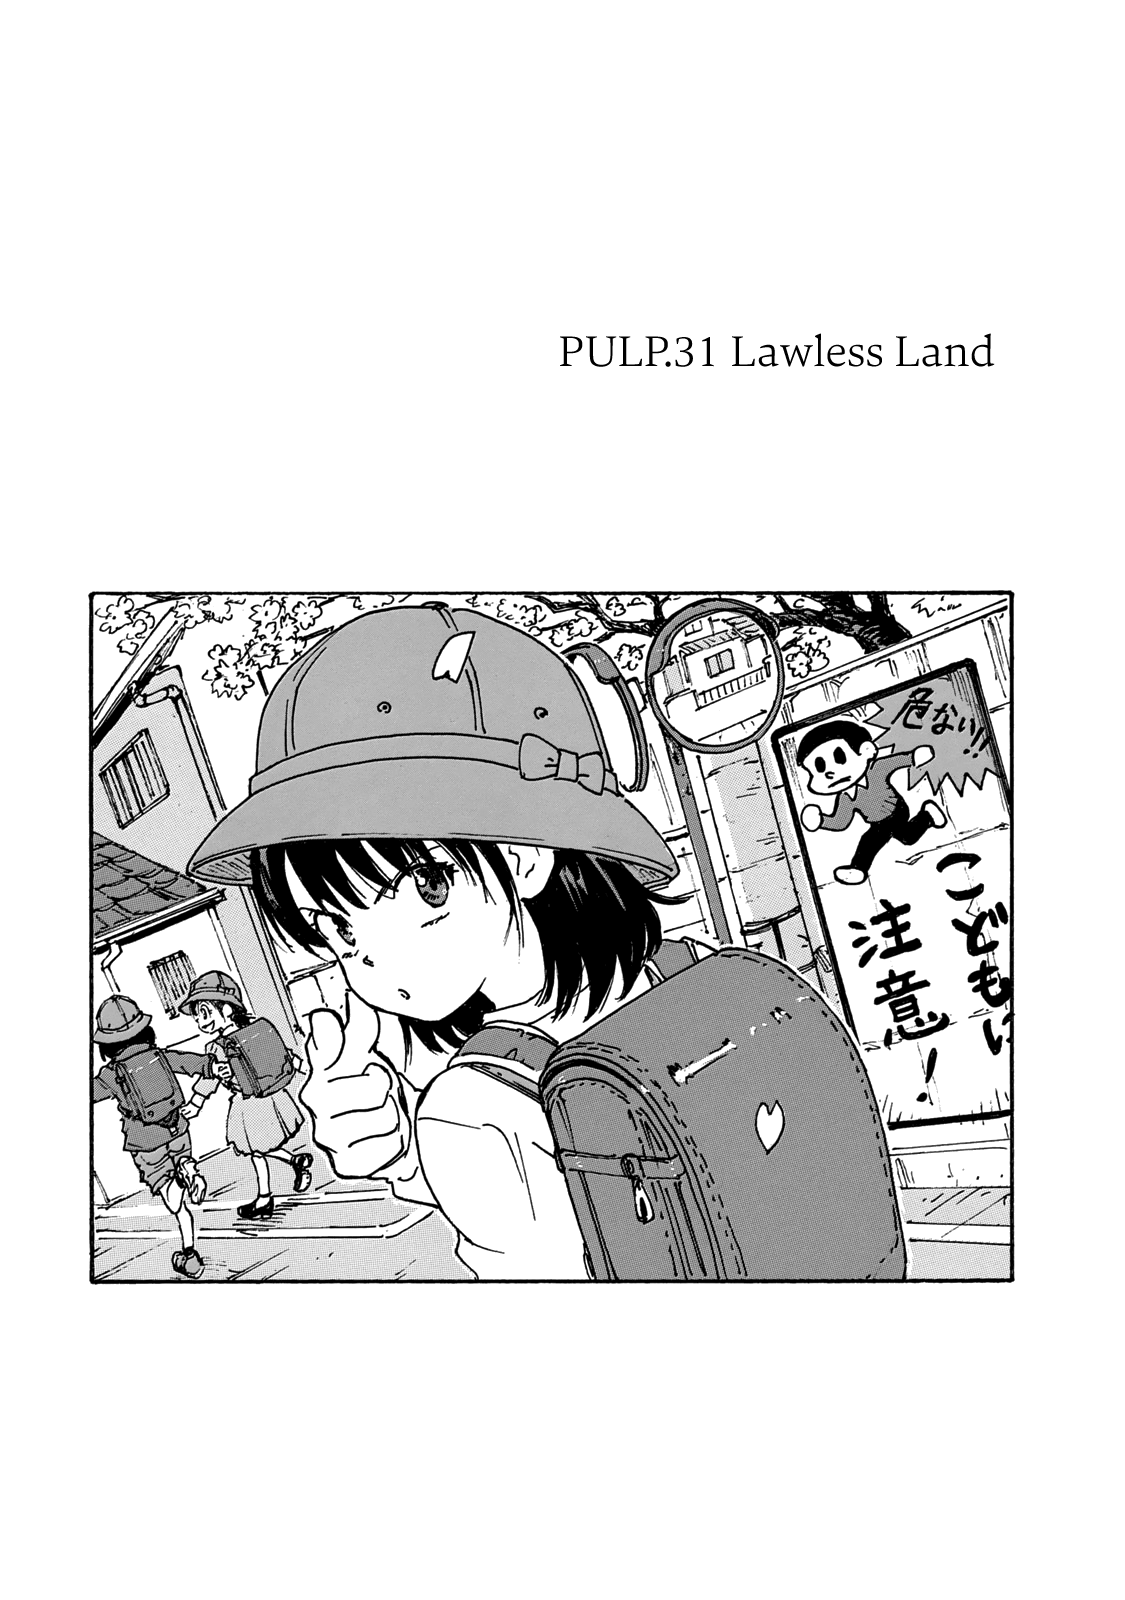 Candy & Cigarettes Vol.7 Chapter 31: Lawless Land - Picture 3